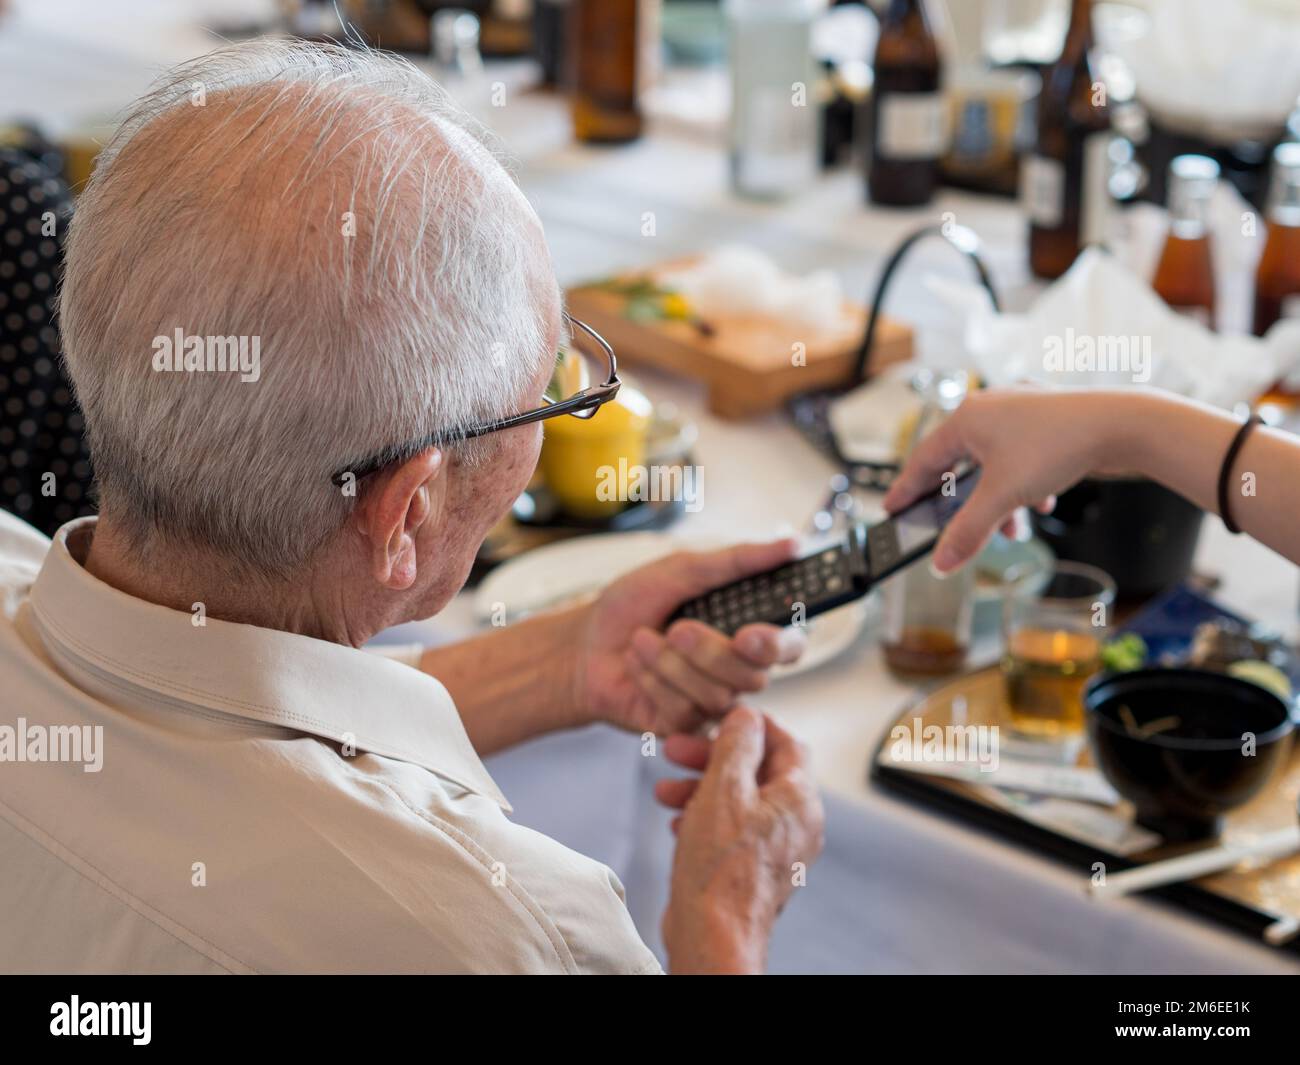 An elderly Asian man struggling to use an old fashioned flip phone Stock Photo